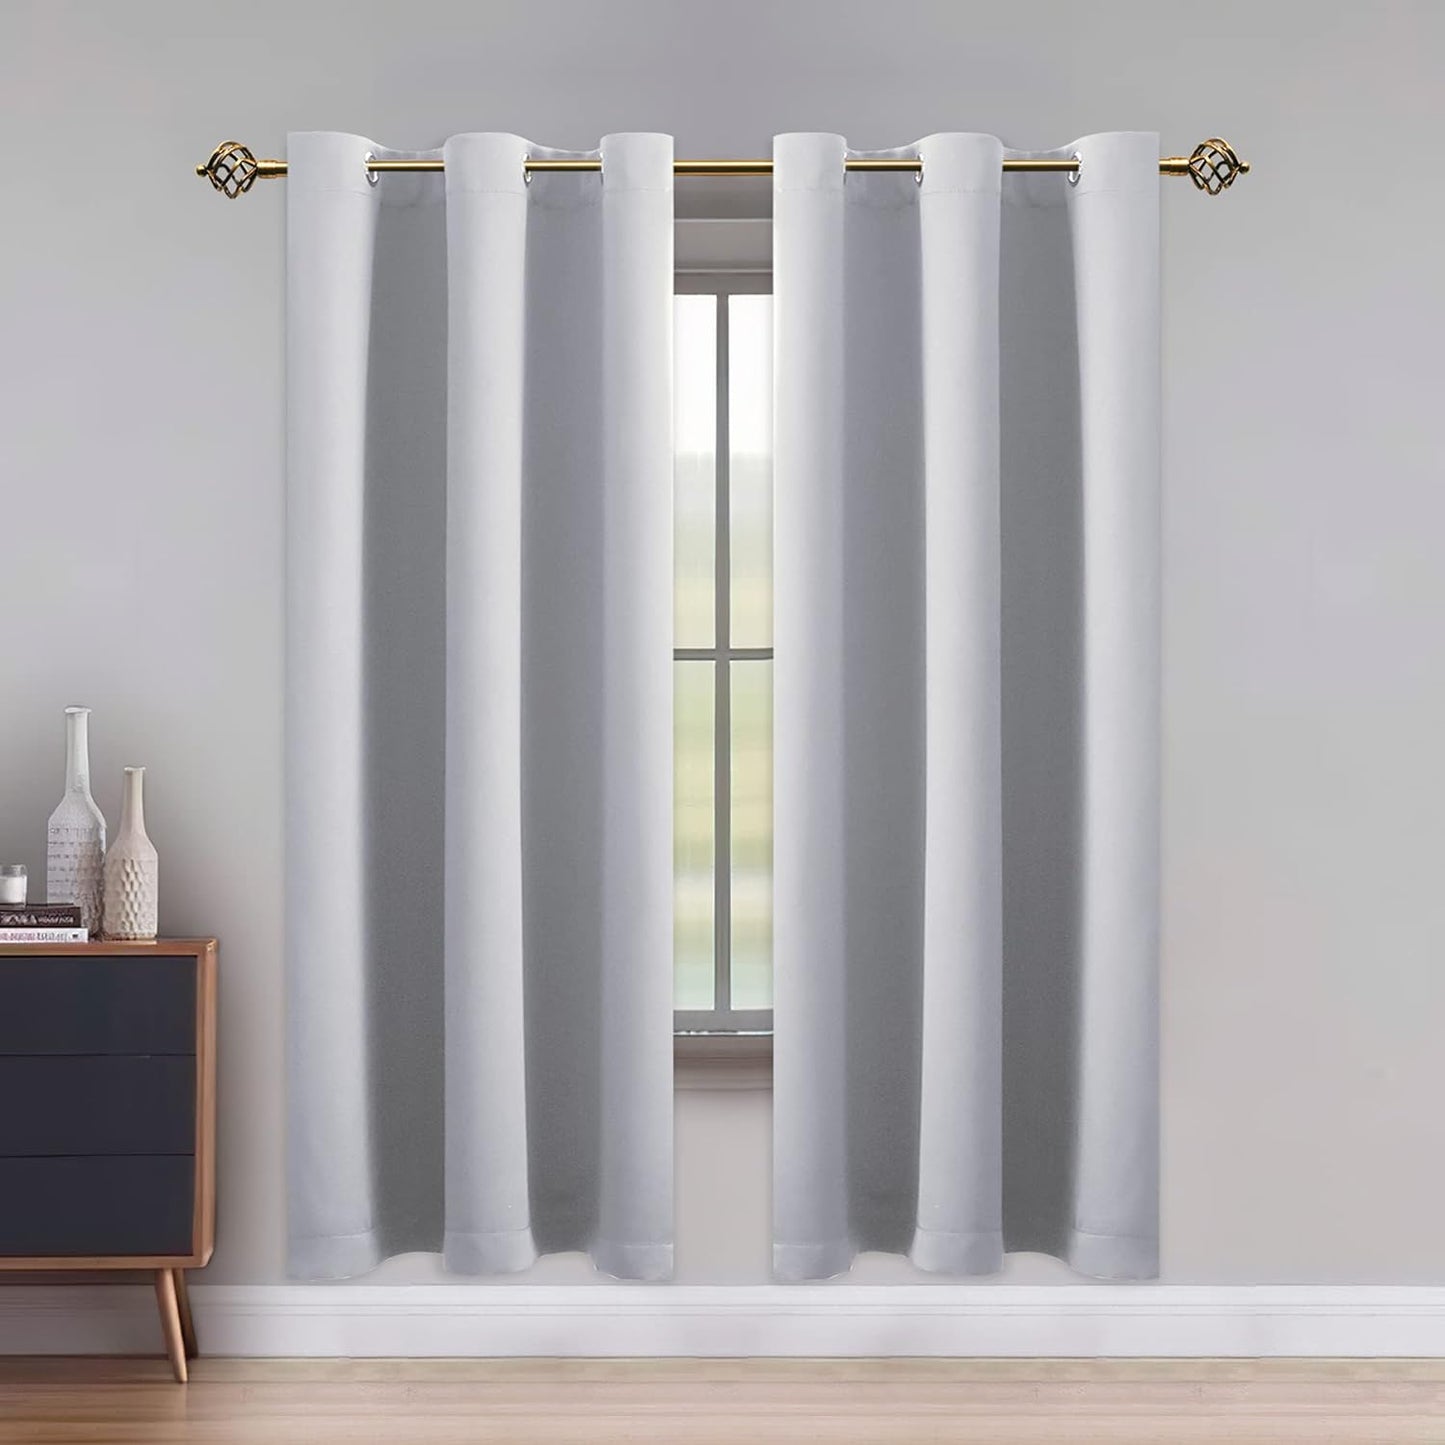 LUSHLEAF Blackout Curtains for Bedroom, Solid Thermal Insulated with Grommet Noise Reduction Window Drapes, Room Darkening Curtains for Living Room, 2 Panels, 52 X 63 Inch Grey  SHEEROOM Silver Grey 42 X 72 Inch 